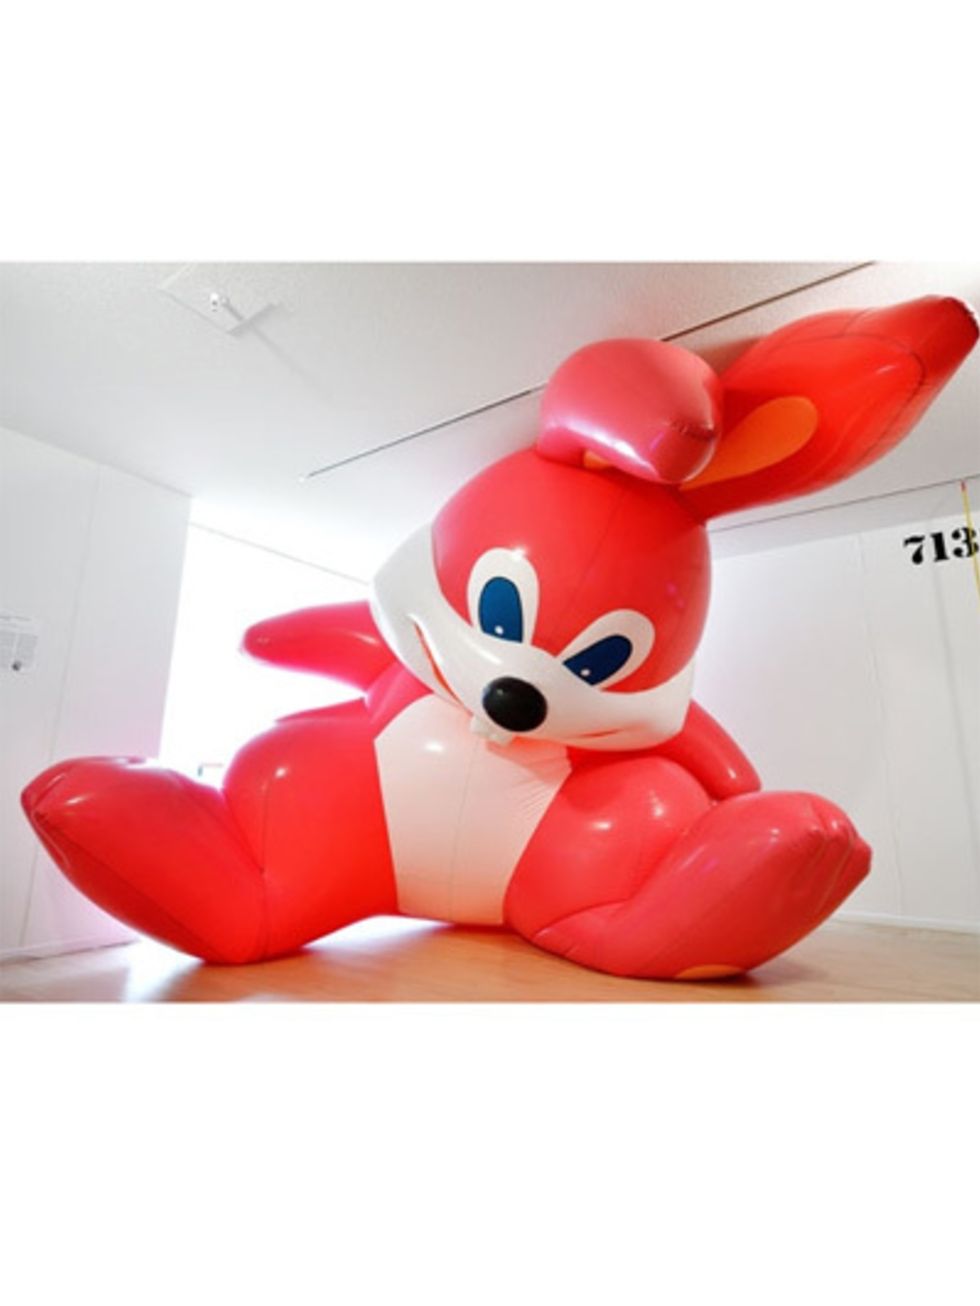 Toy, Red, Baby toys, Carmine, Animal figure, Snout, Figurine, Coquelicot, Rabbits and Hares, Fictional character, 